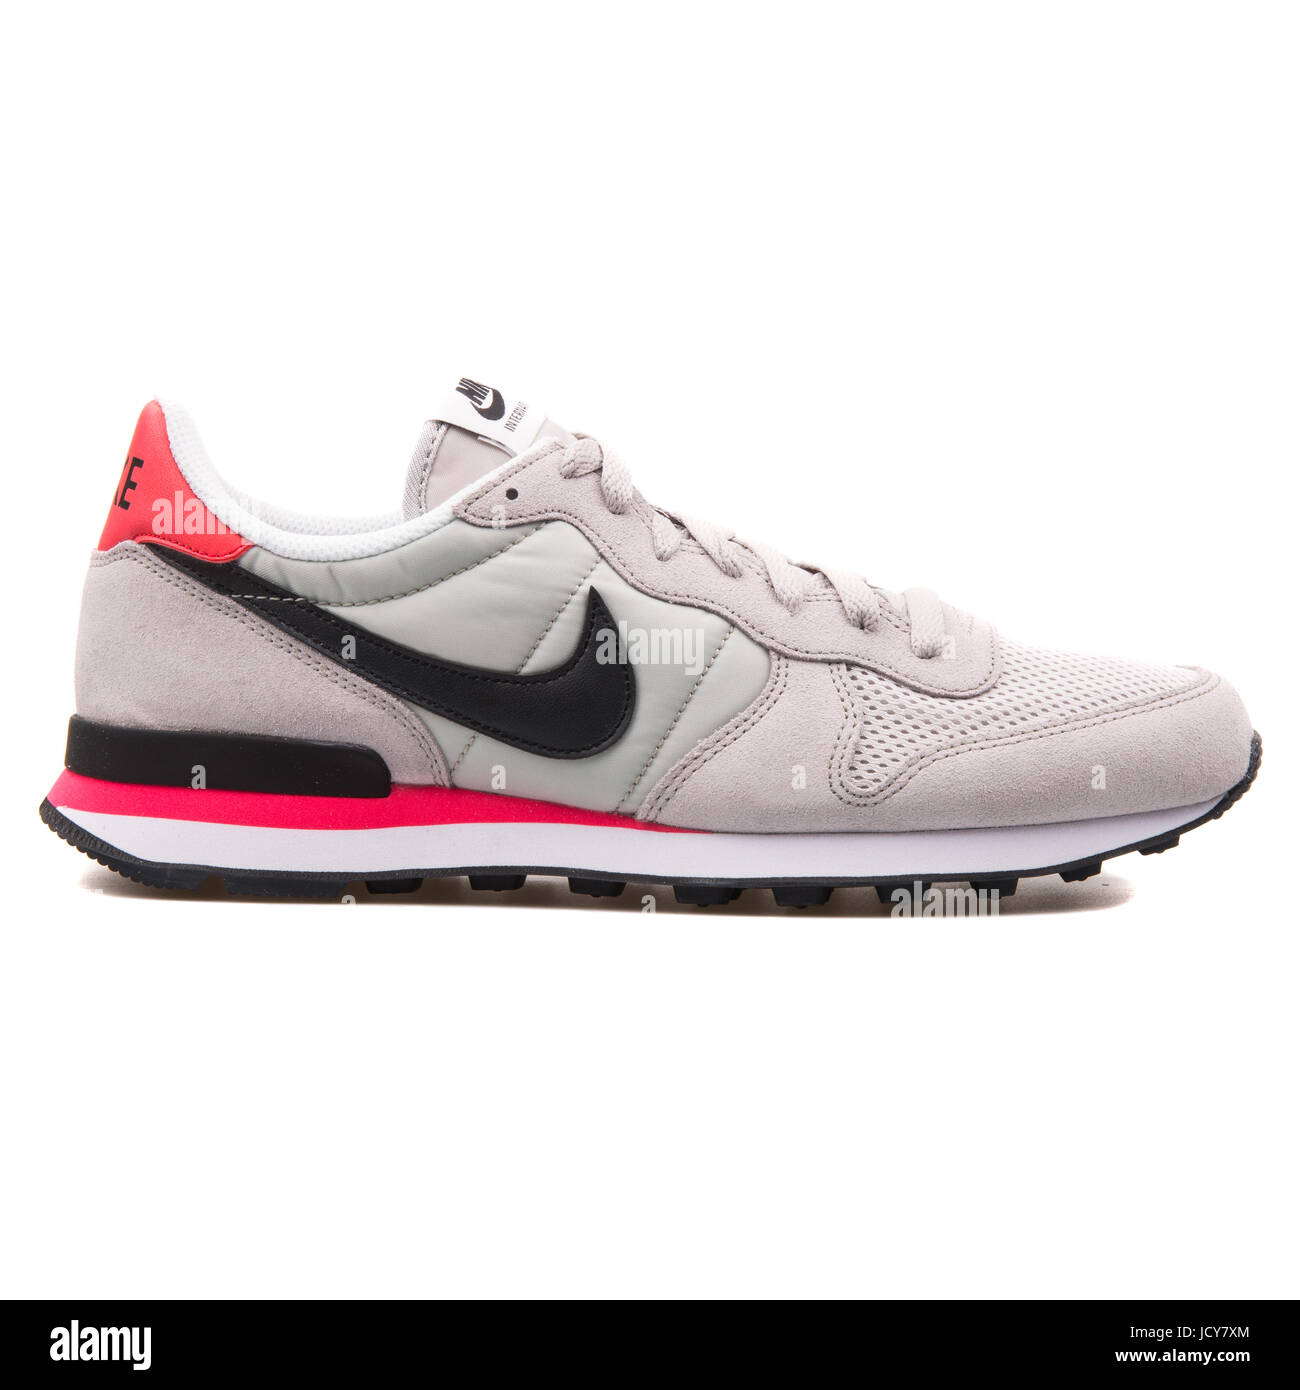 Nike Internationalist Neutral Grey, Black and Red Men's Shoes - 631754-006 Photo - Alamy